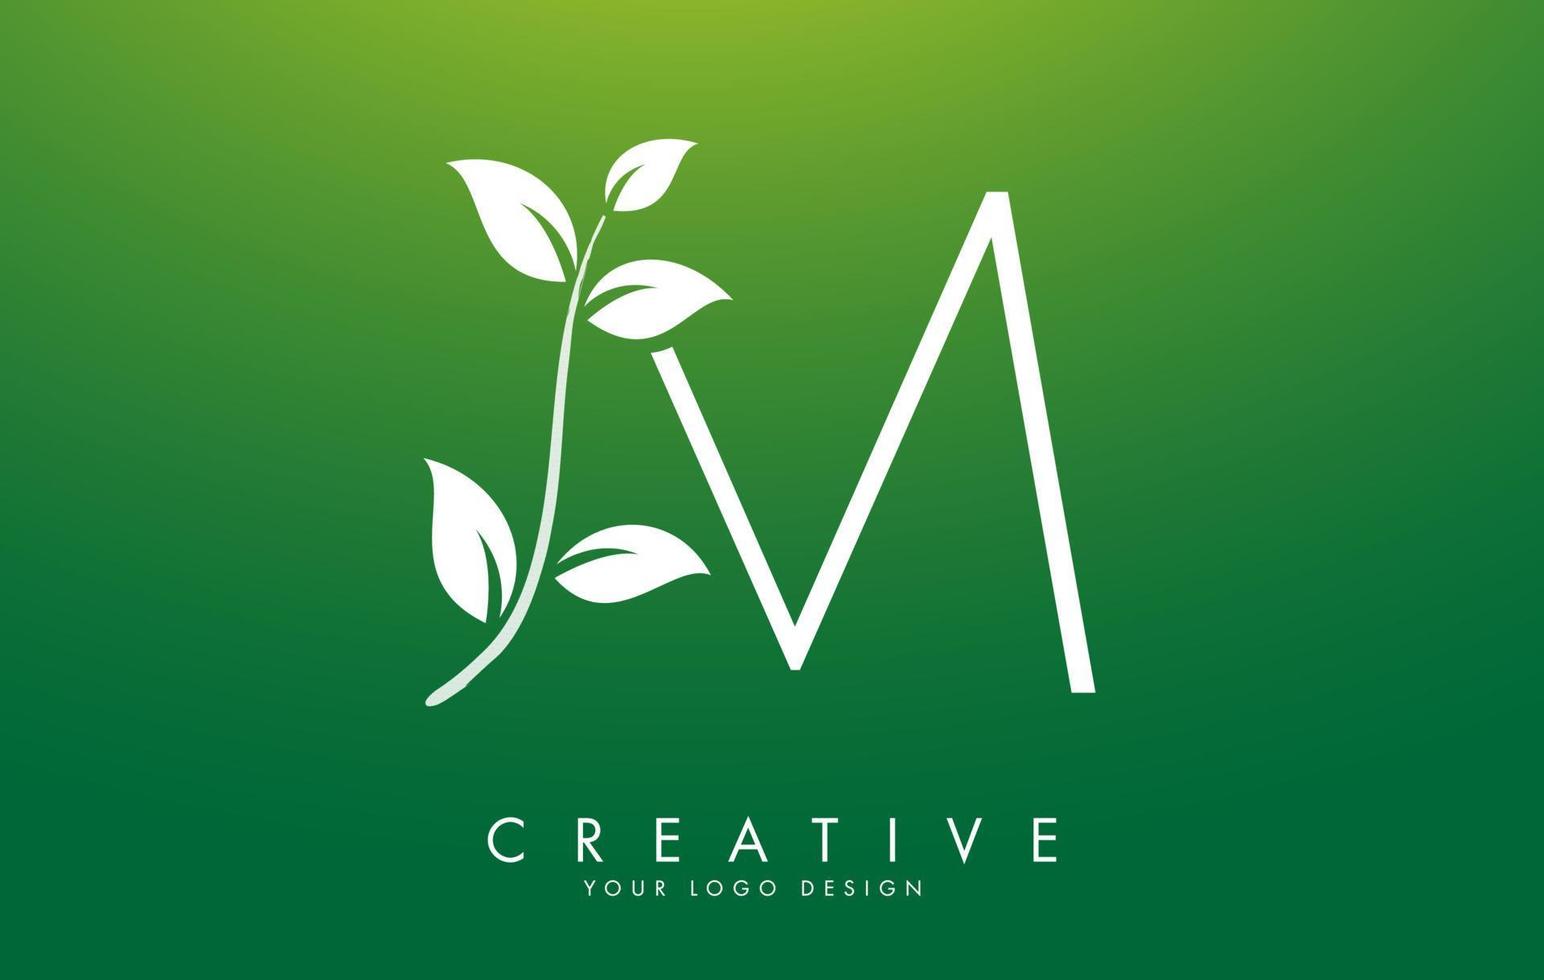 White Leaf Letter M Logo Design with Leaves on a Branch and Green Background. Letter M with nature concept. vector